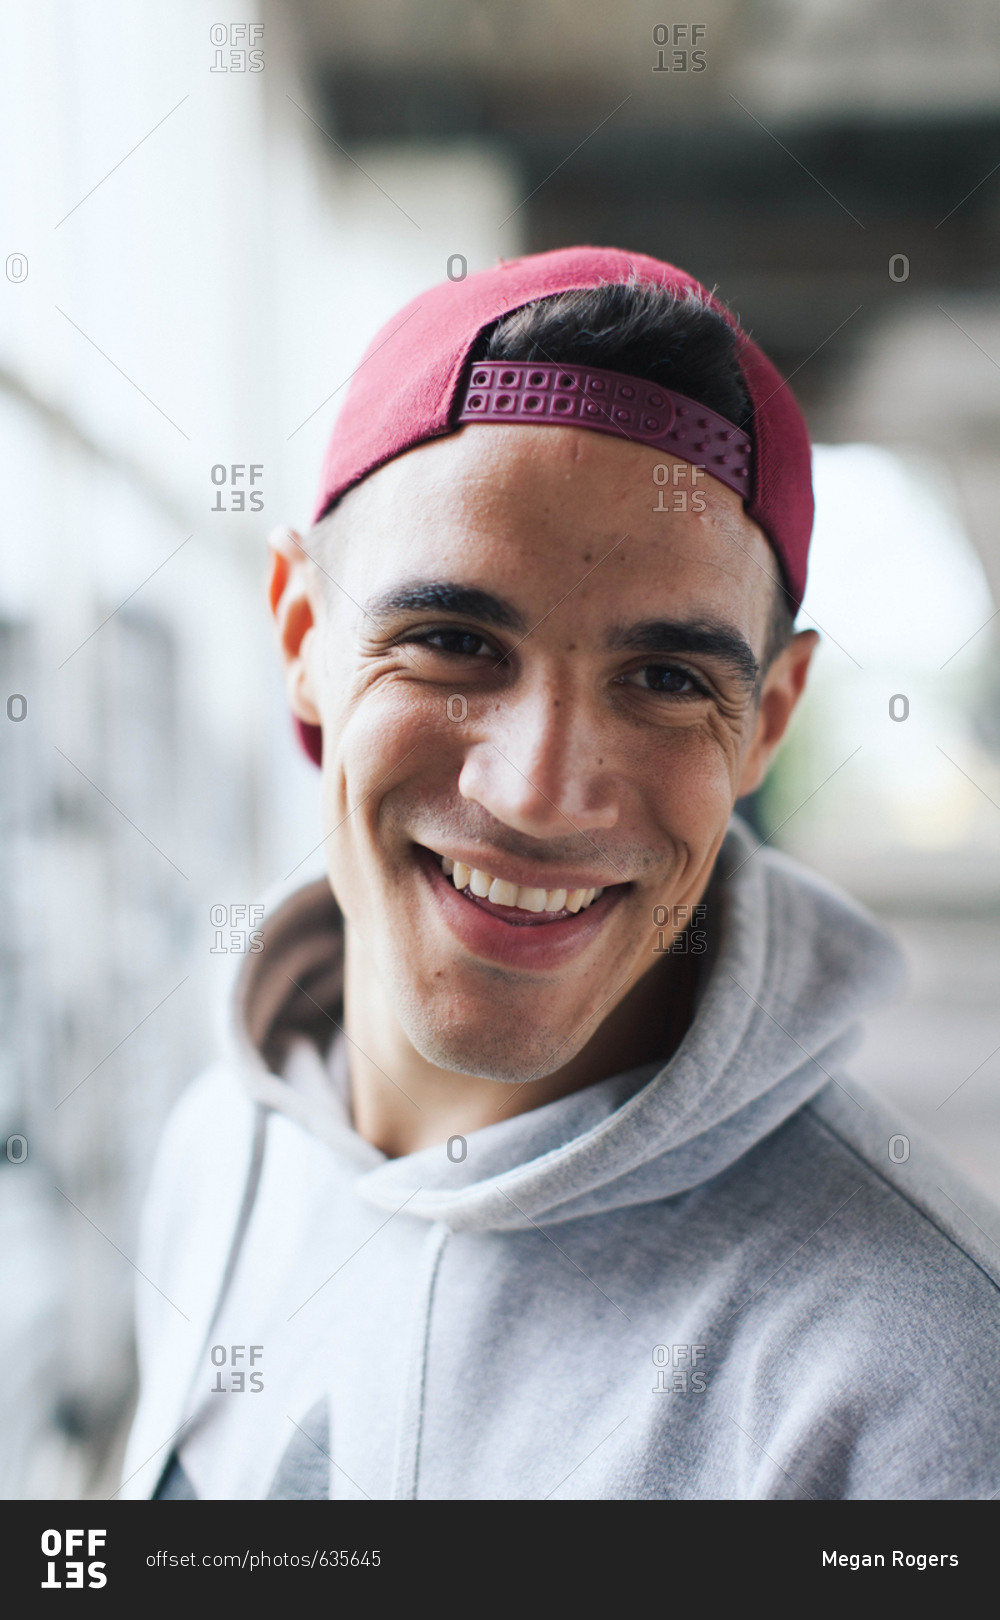 Opposite Personally lightly Portrait of trendy young man smiling in athletic wear and a backward  baseball cap stock photo - OFFSET